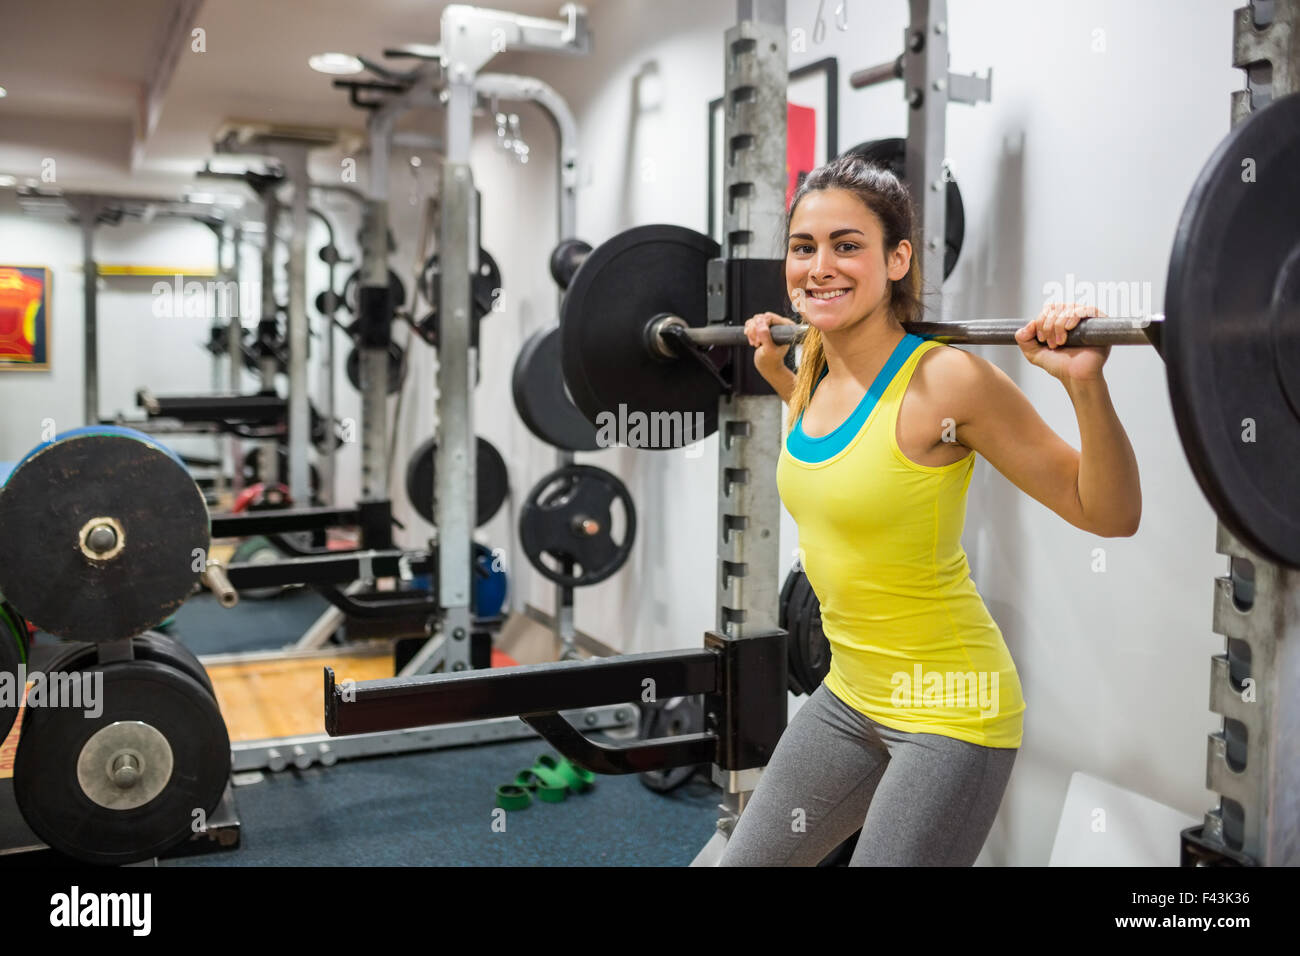 Determined woman lifting a barbell Stock Photo